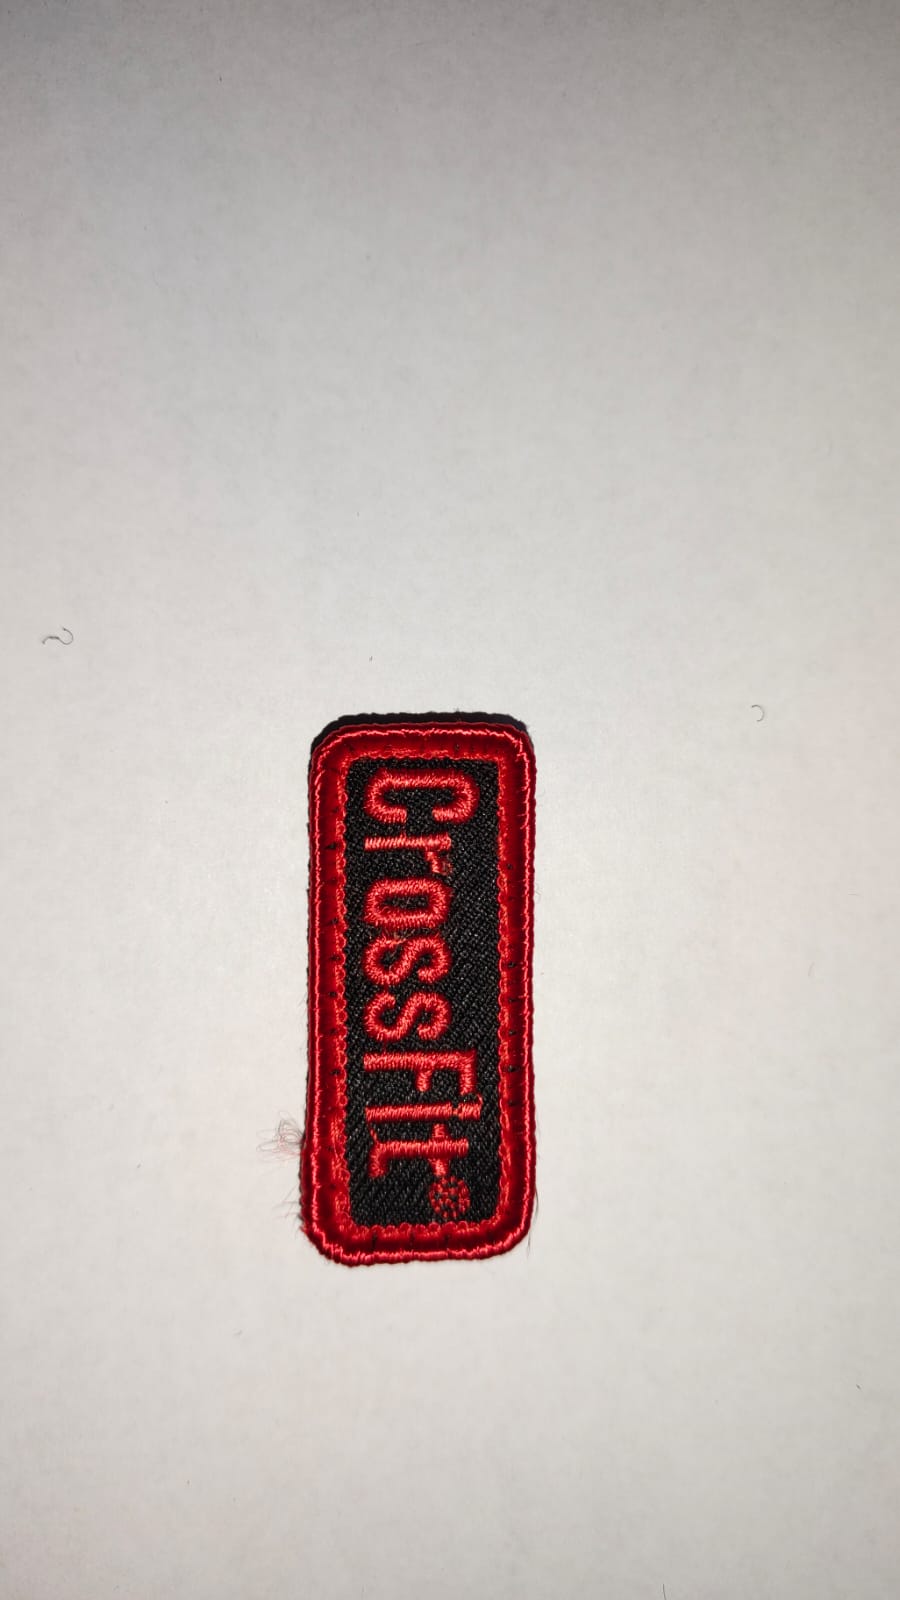 Missions - CrossFit Patch